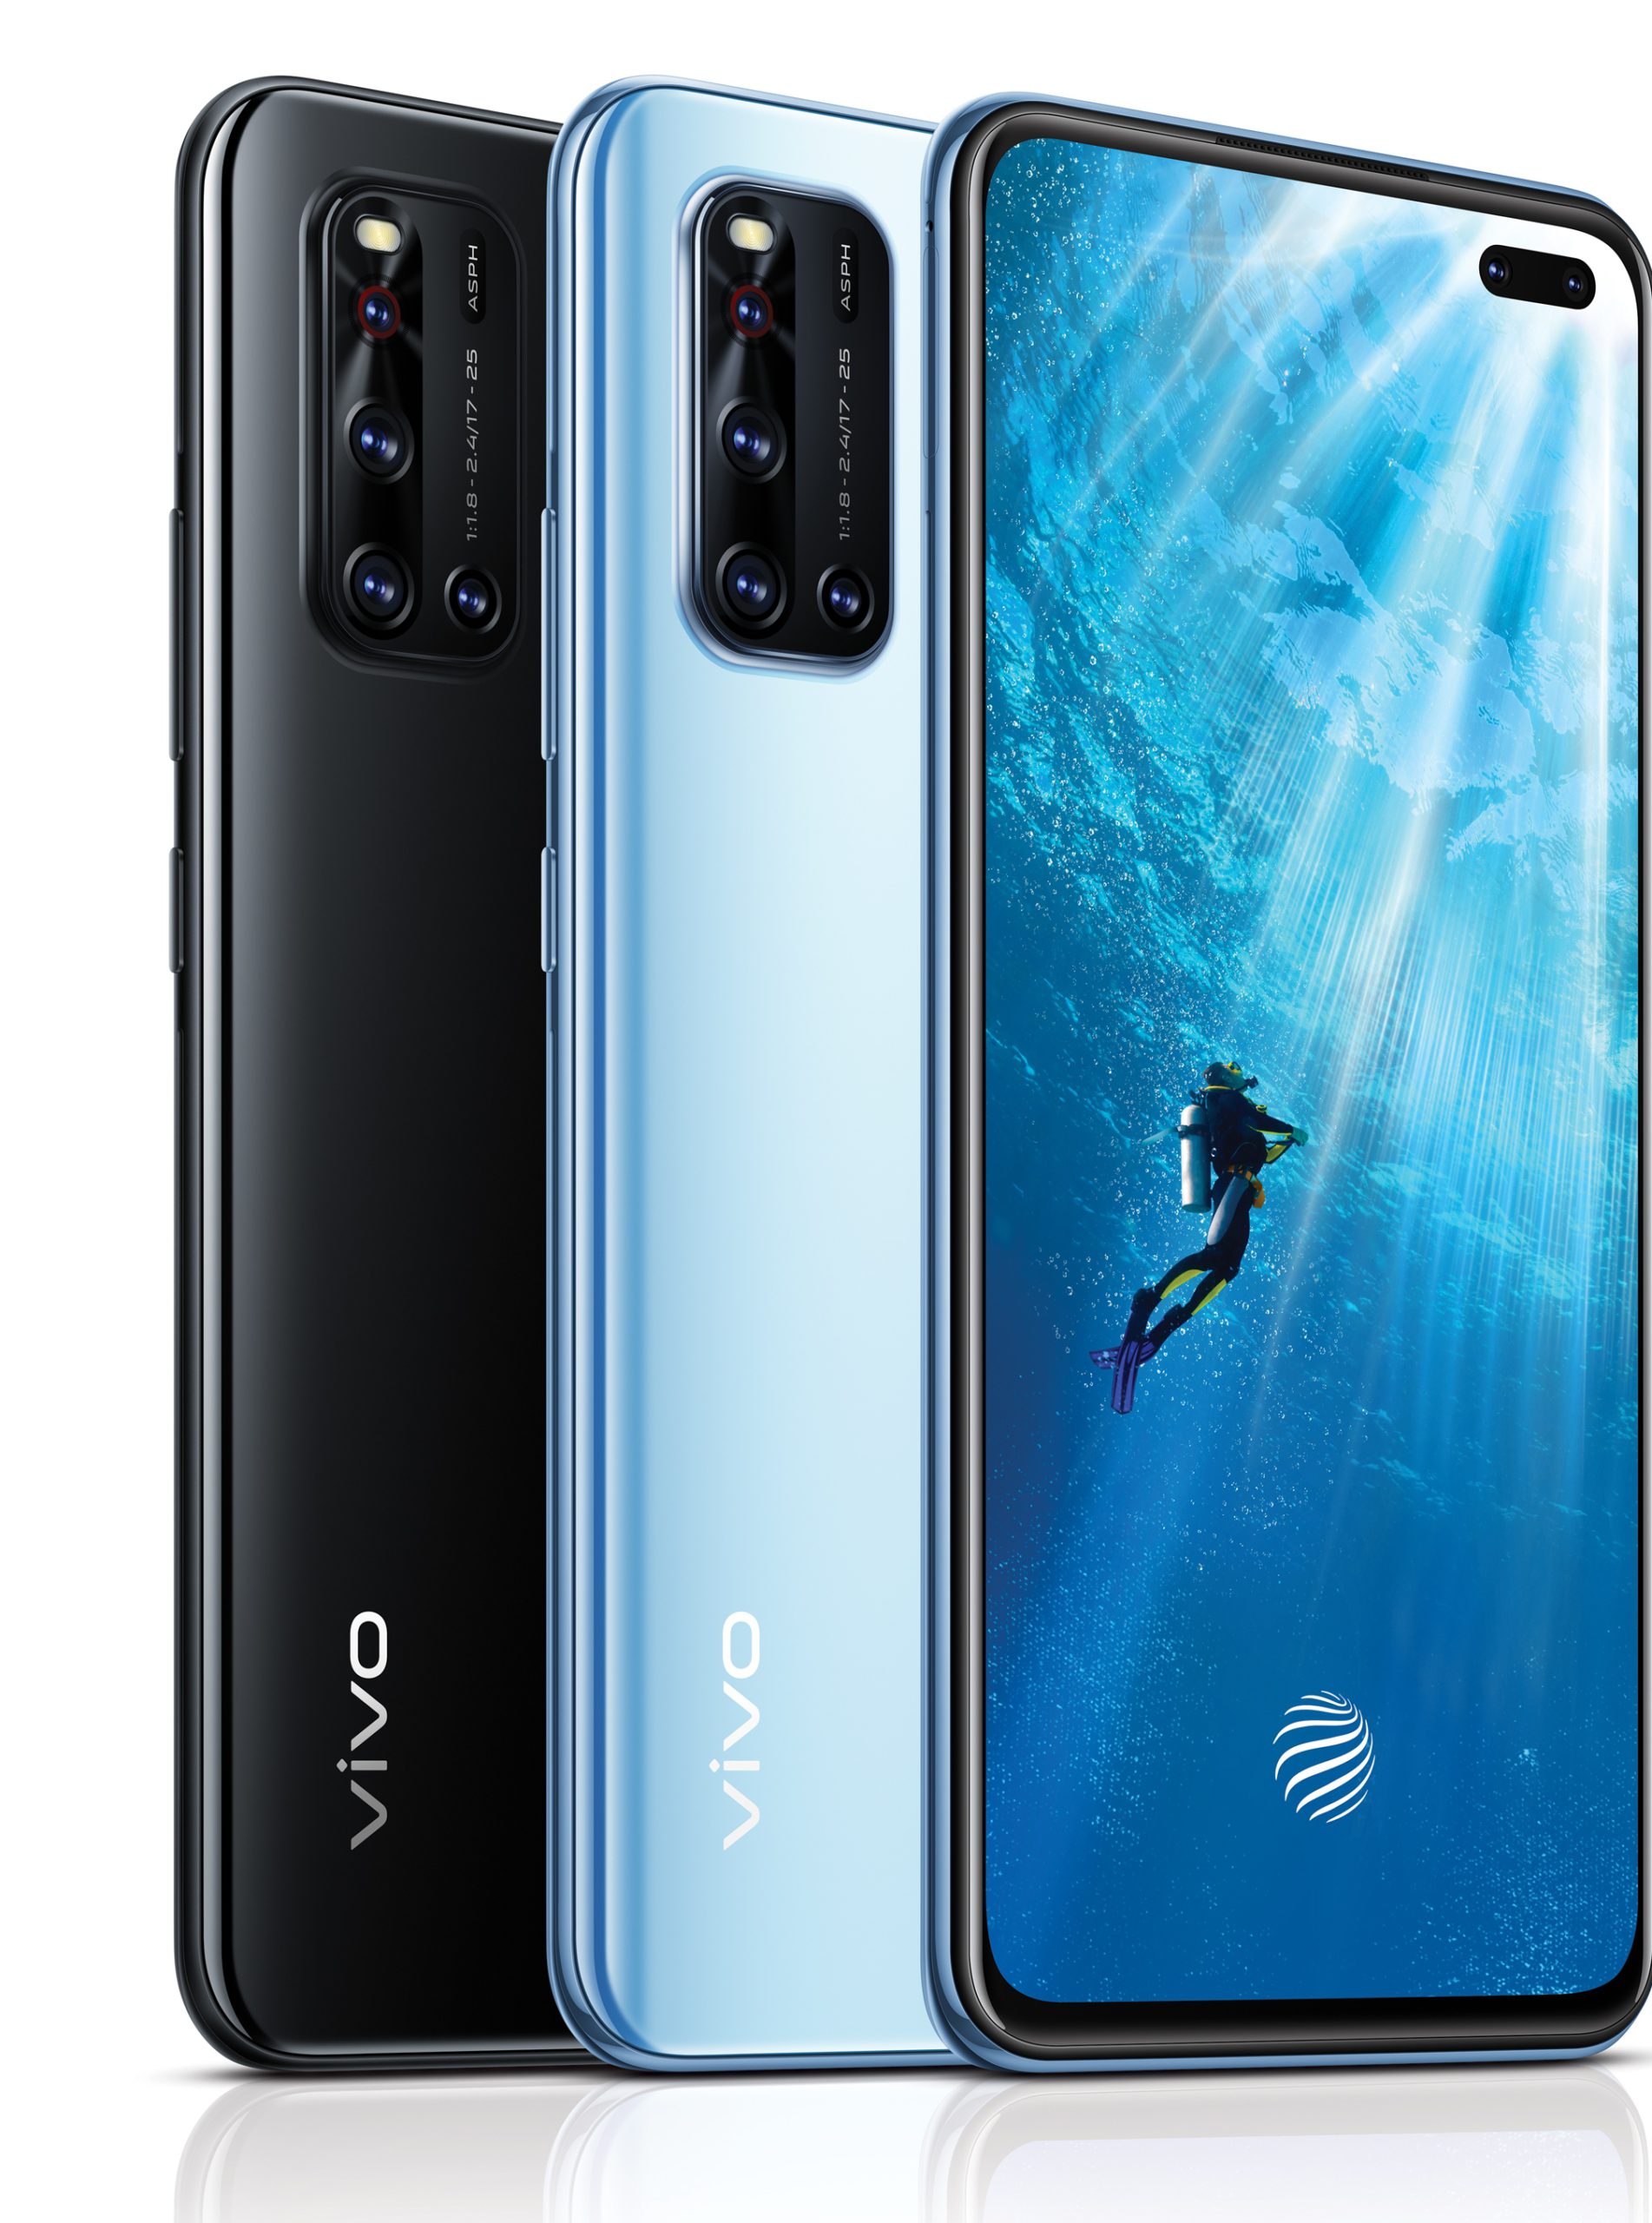 Vivo Offers Stunning Selfies on its V19 for a New and Attractive Price Tag